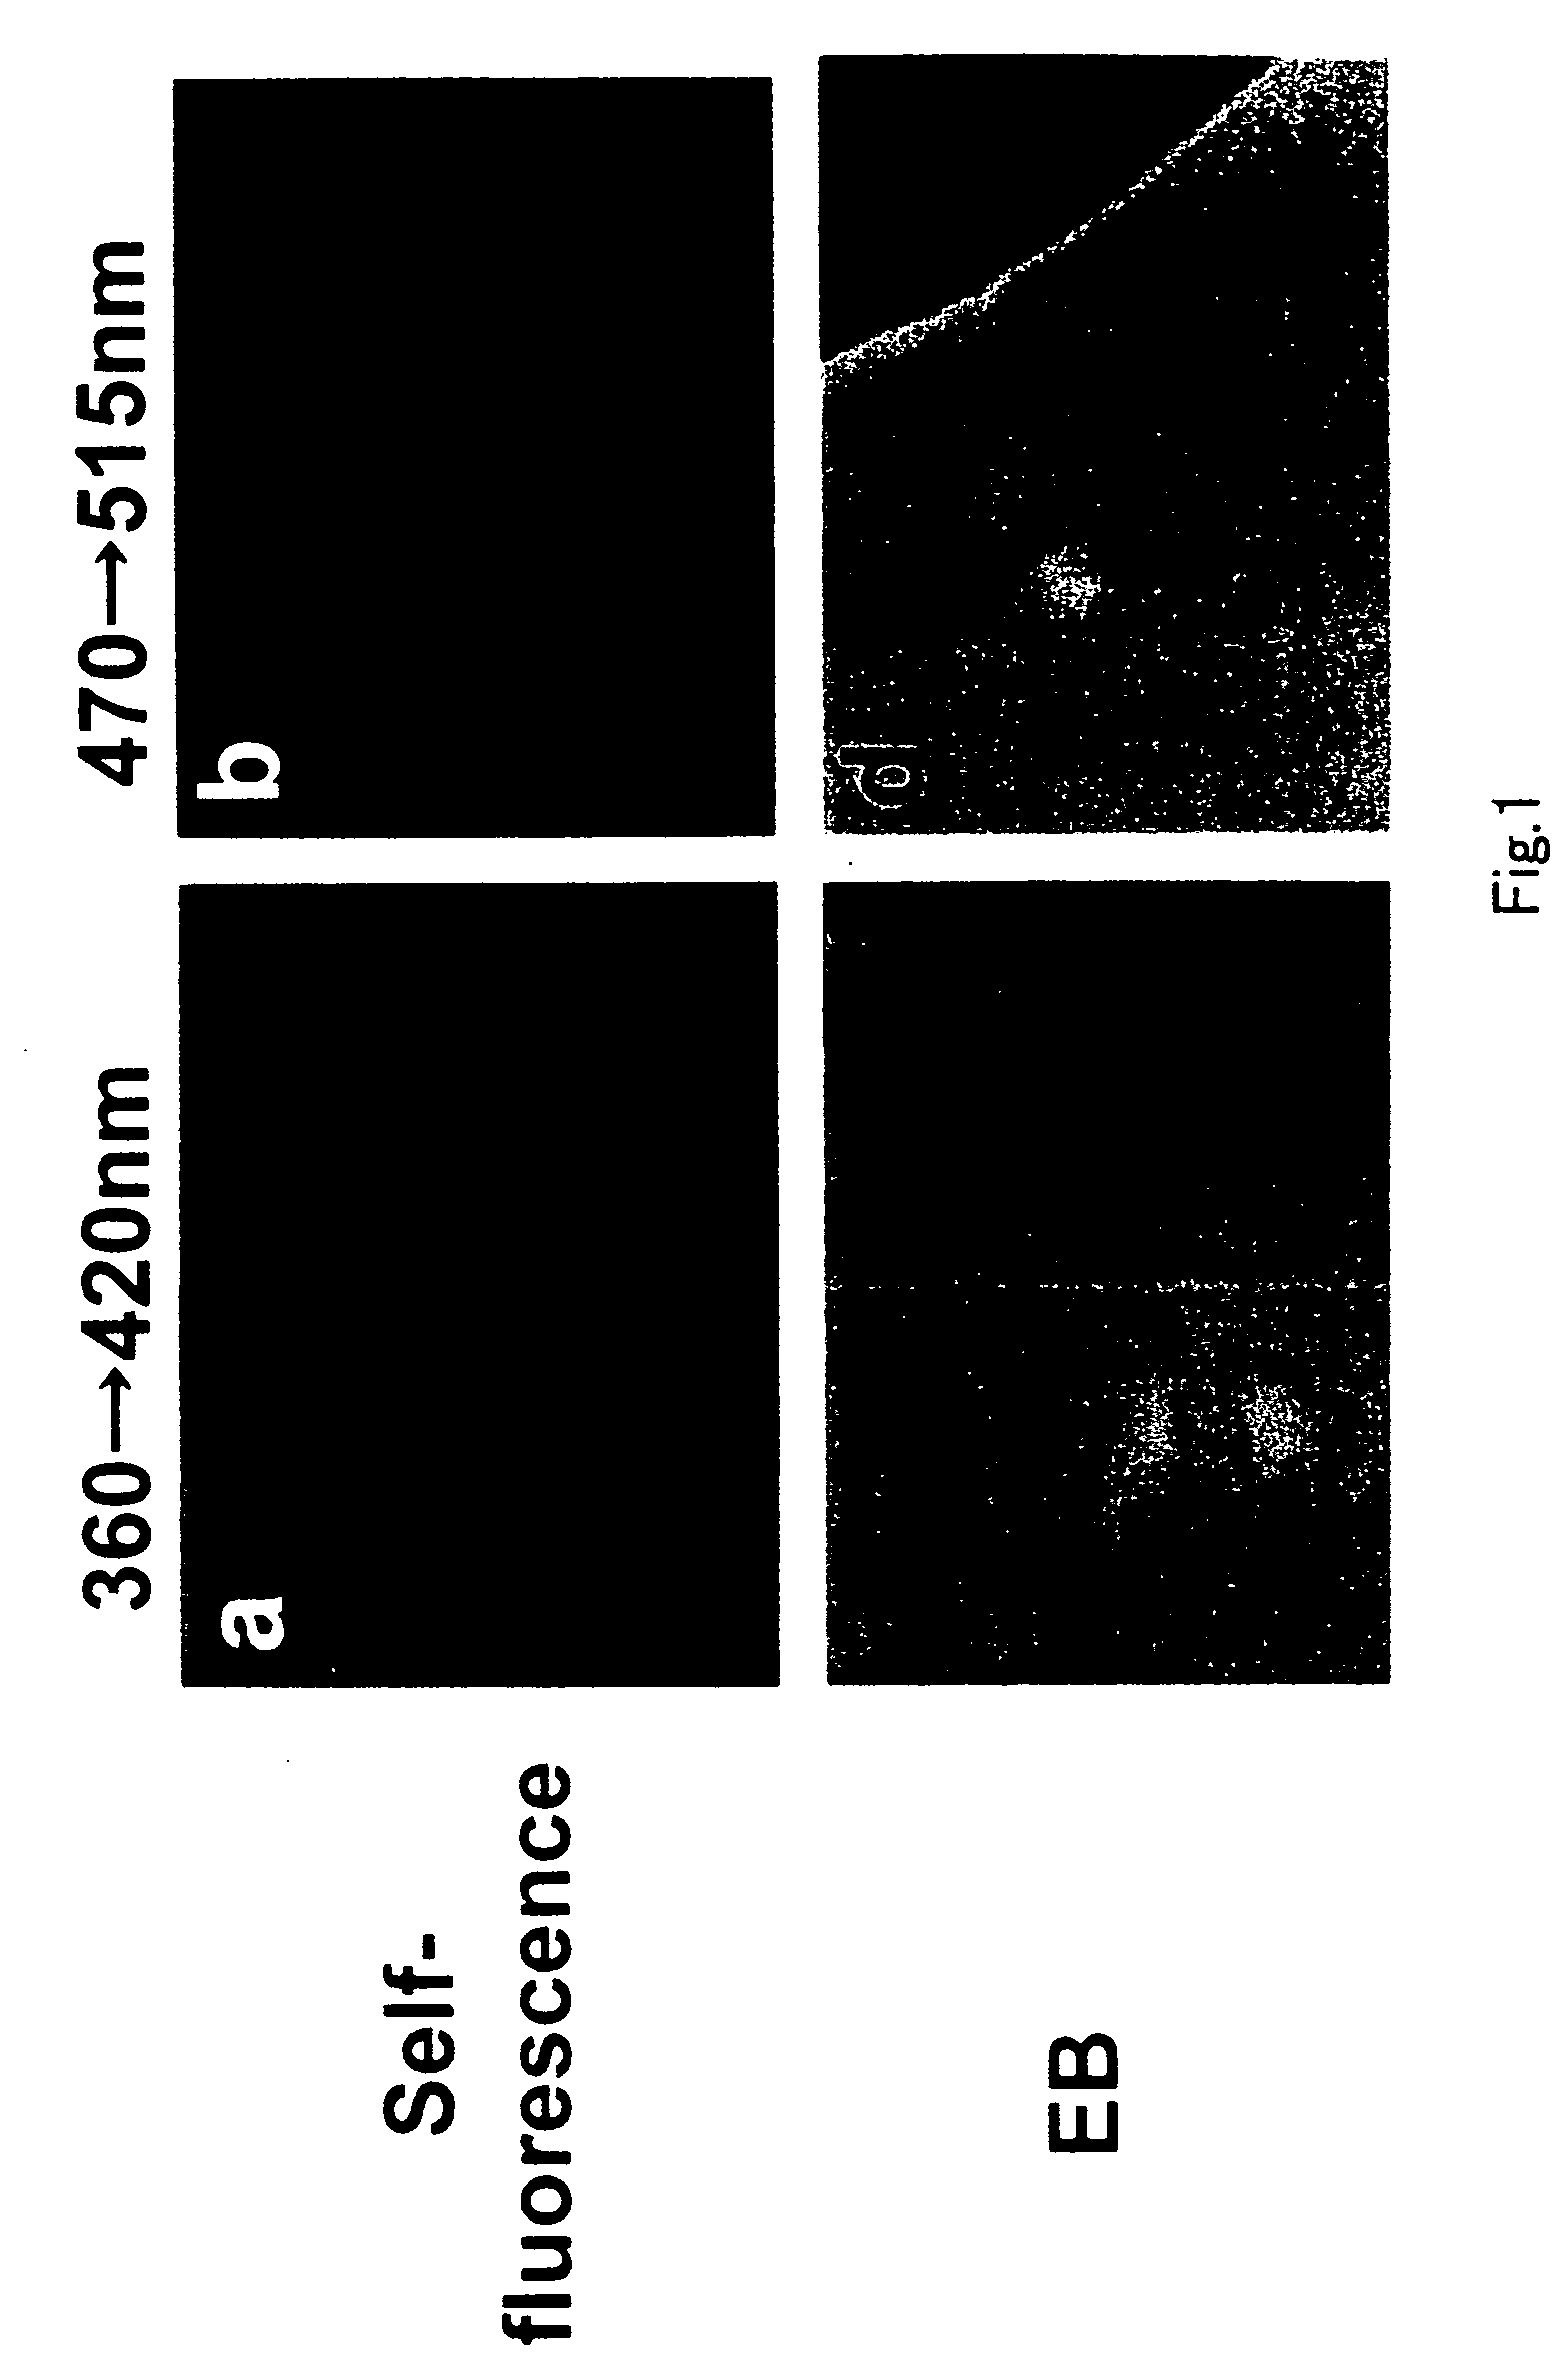 Medicine for detecting lipid components in vivo and vascular endoscope